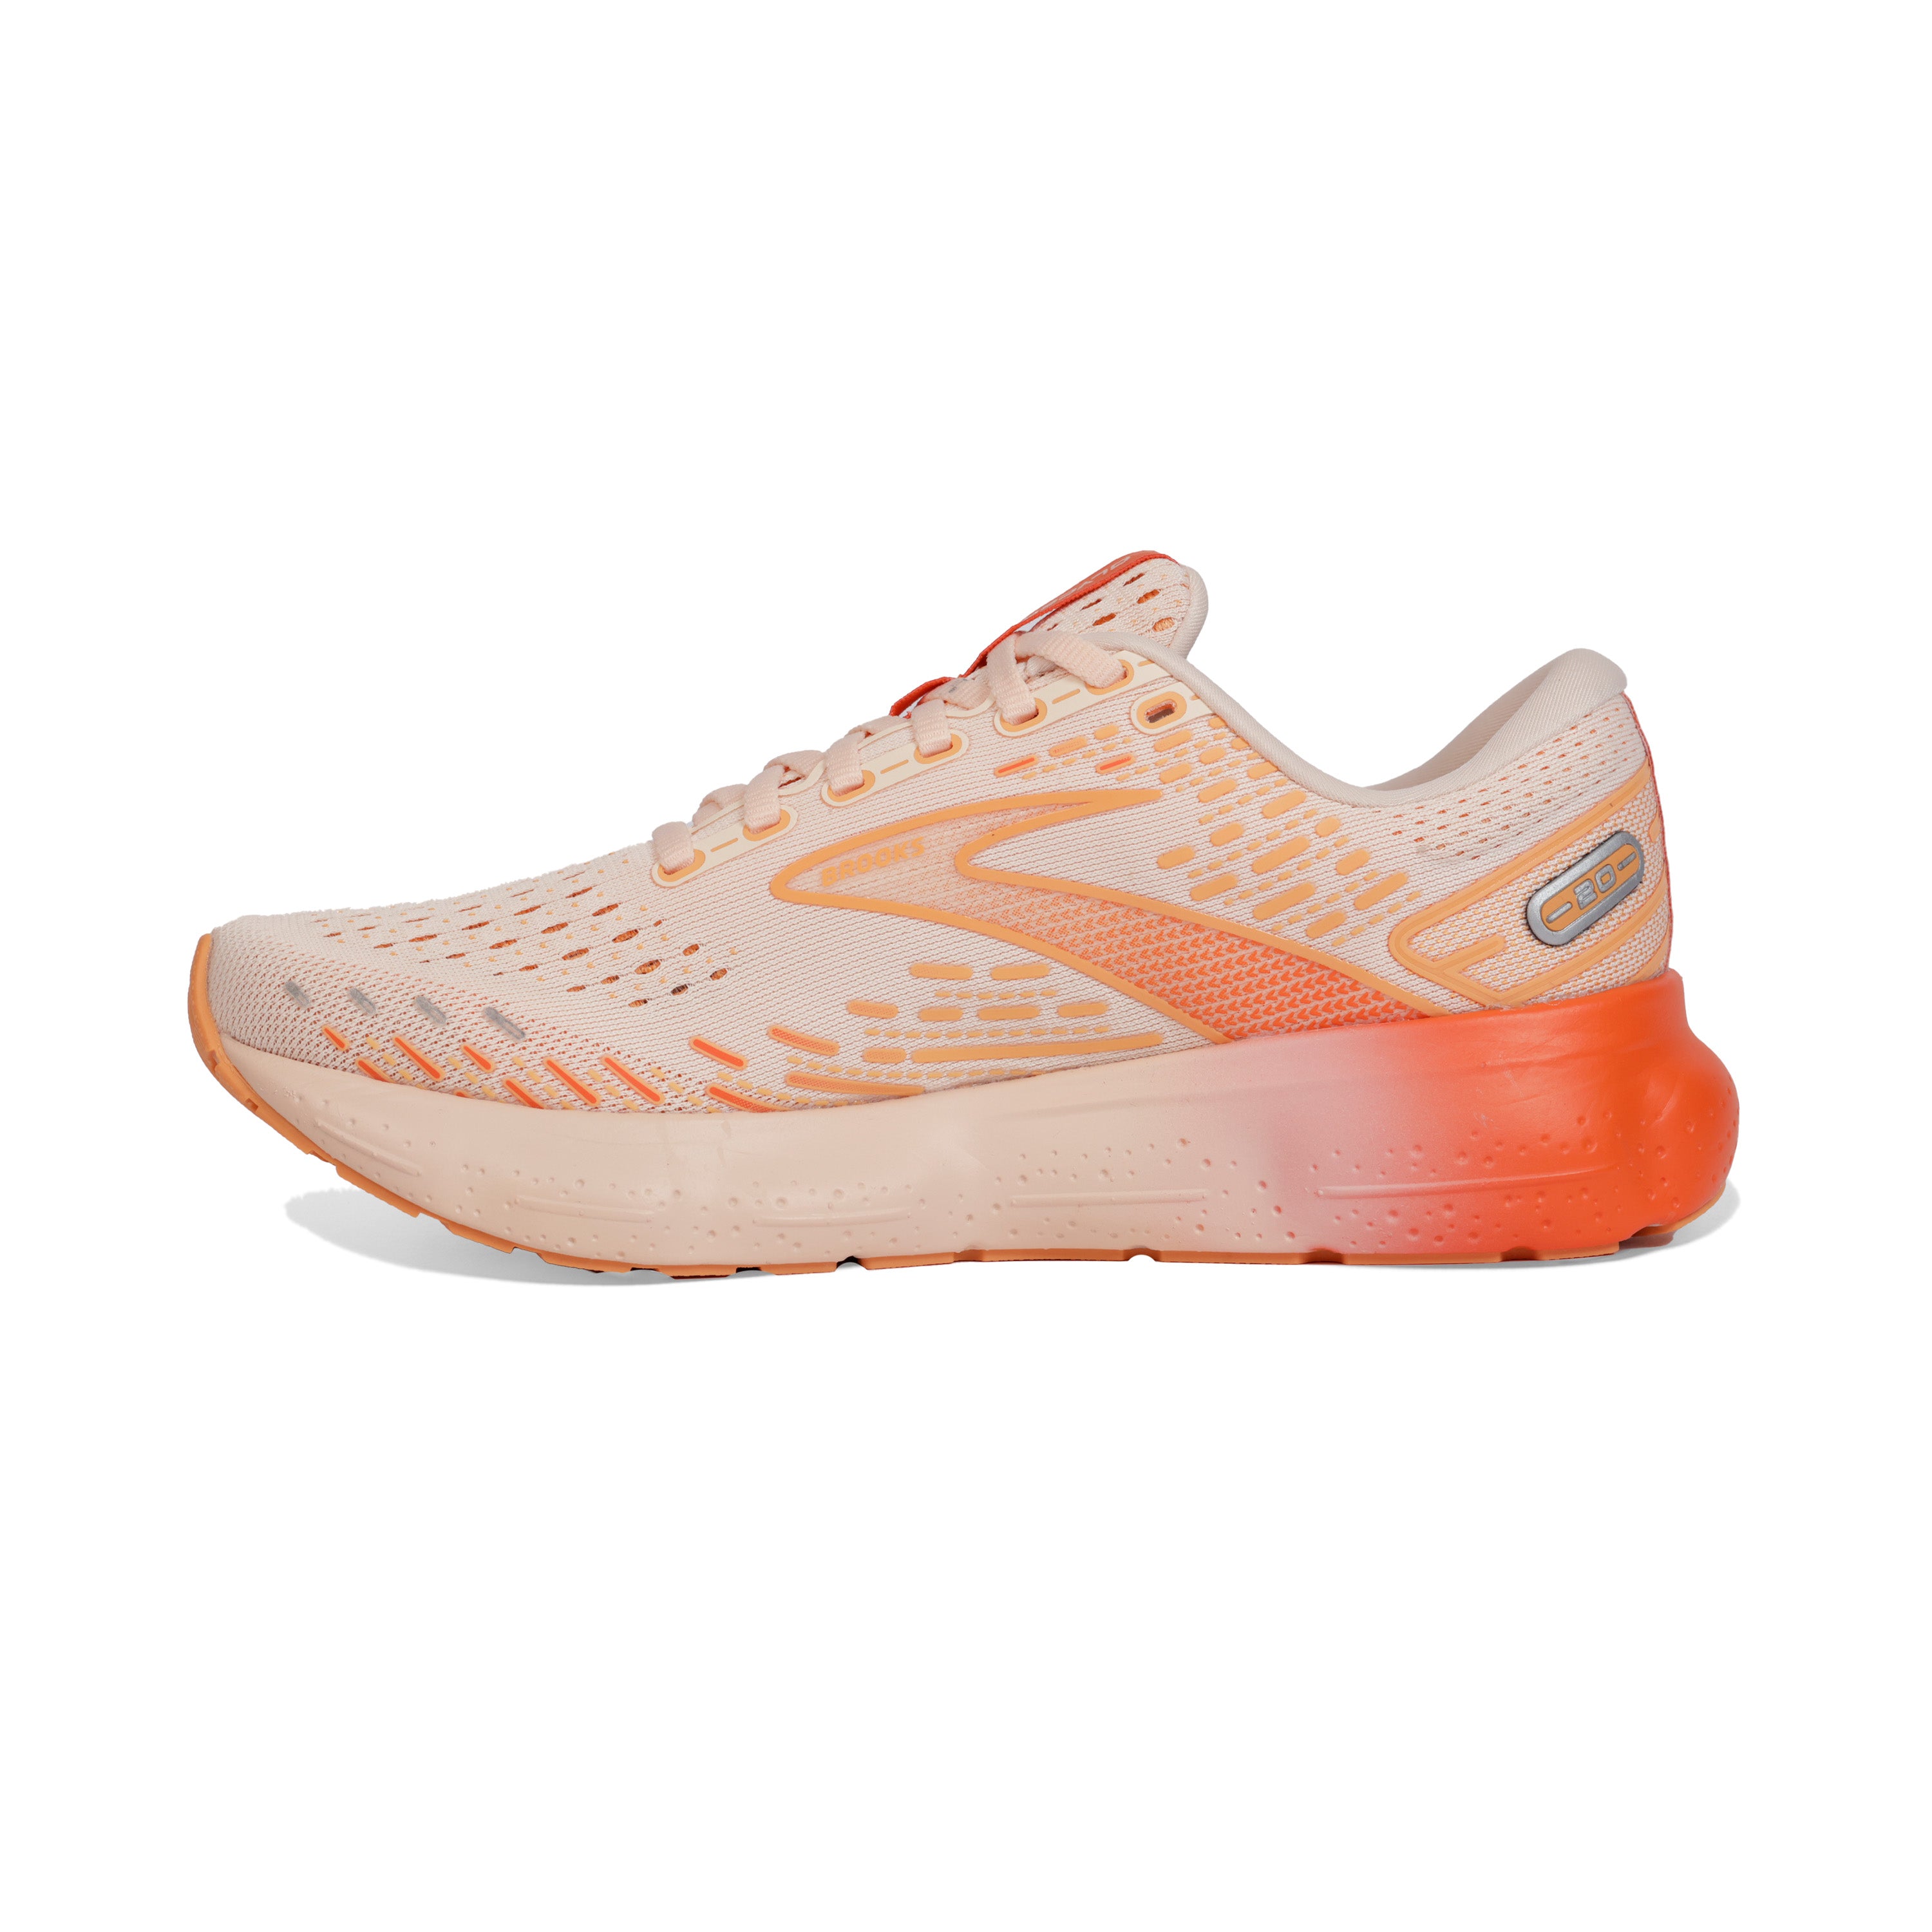 Glycerin 20 (LE) - Women's Road Running Shoes